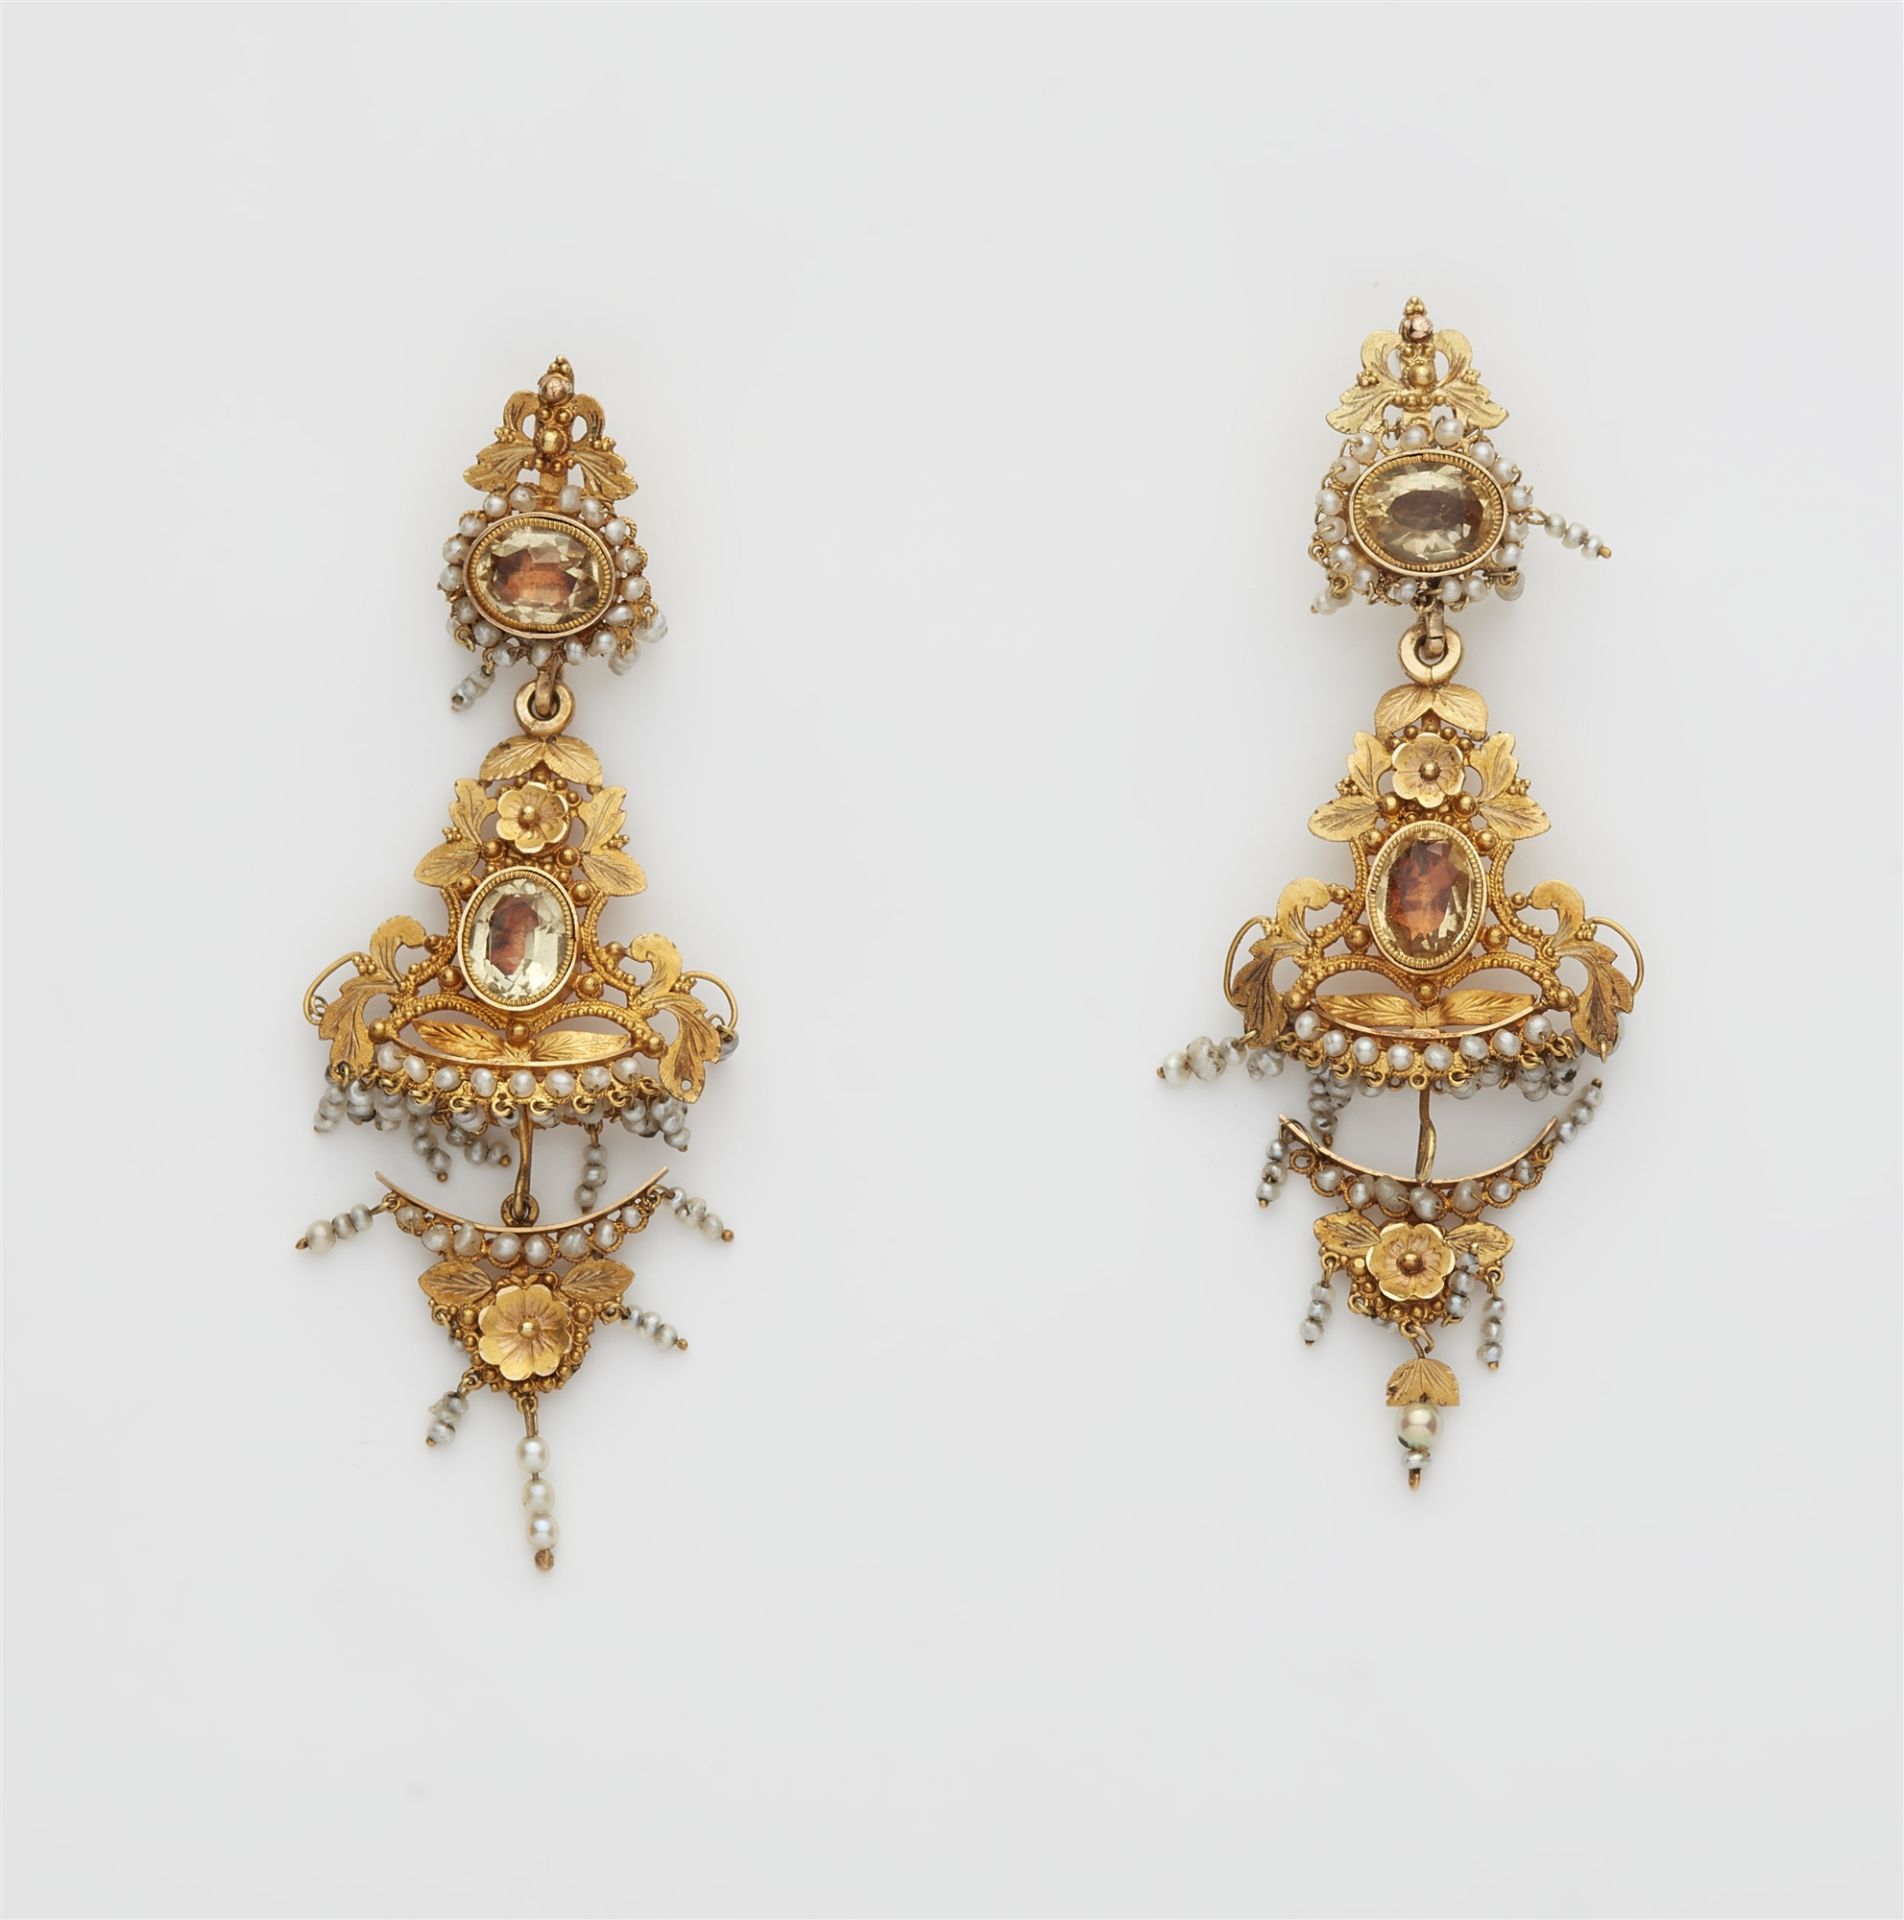 A pair of 18k gold filigree natural pearl and foiled paste dangling earrings.